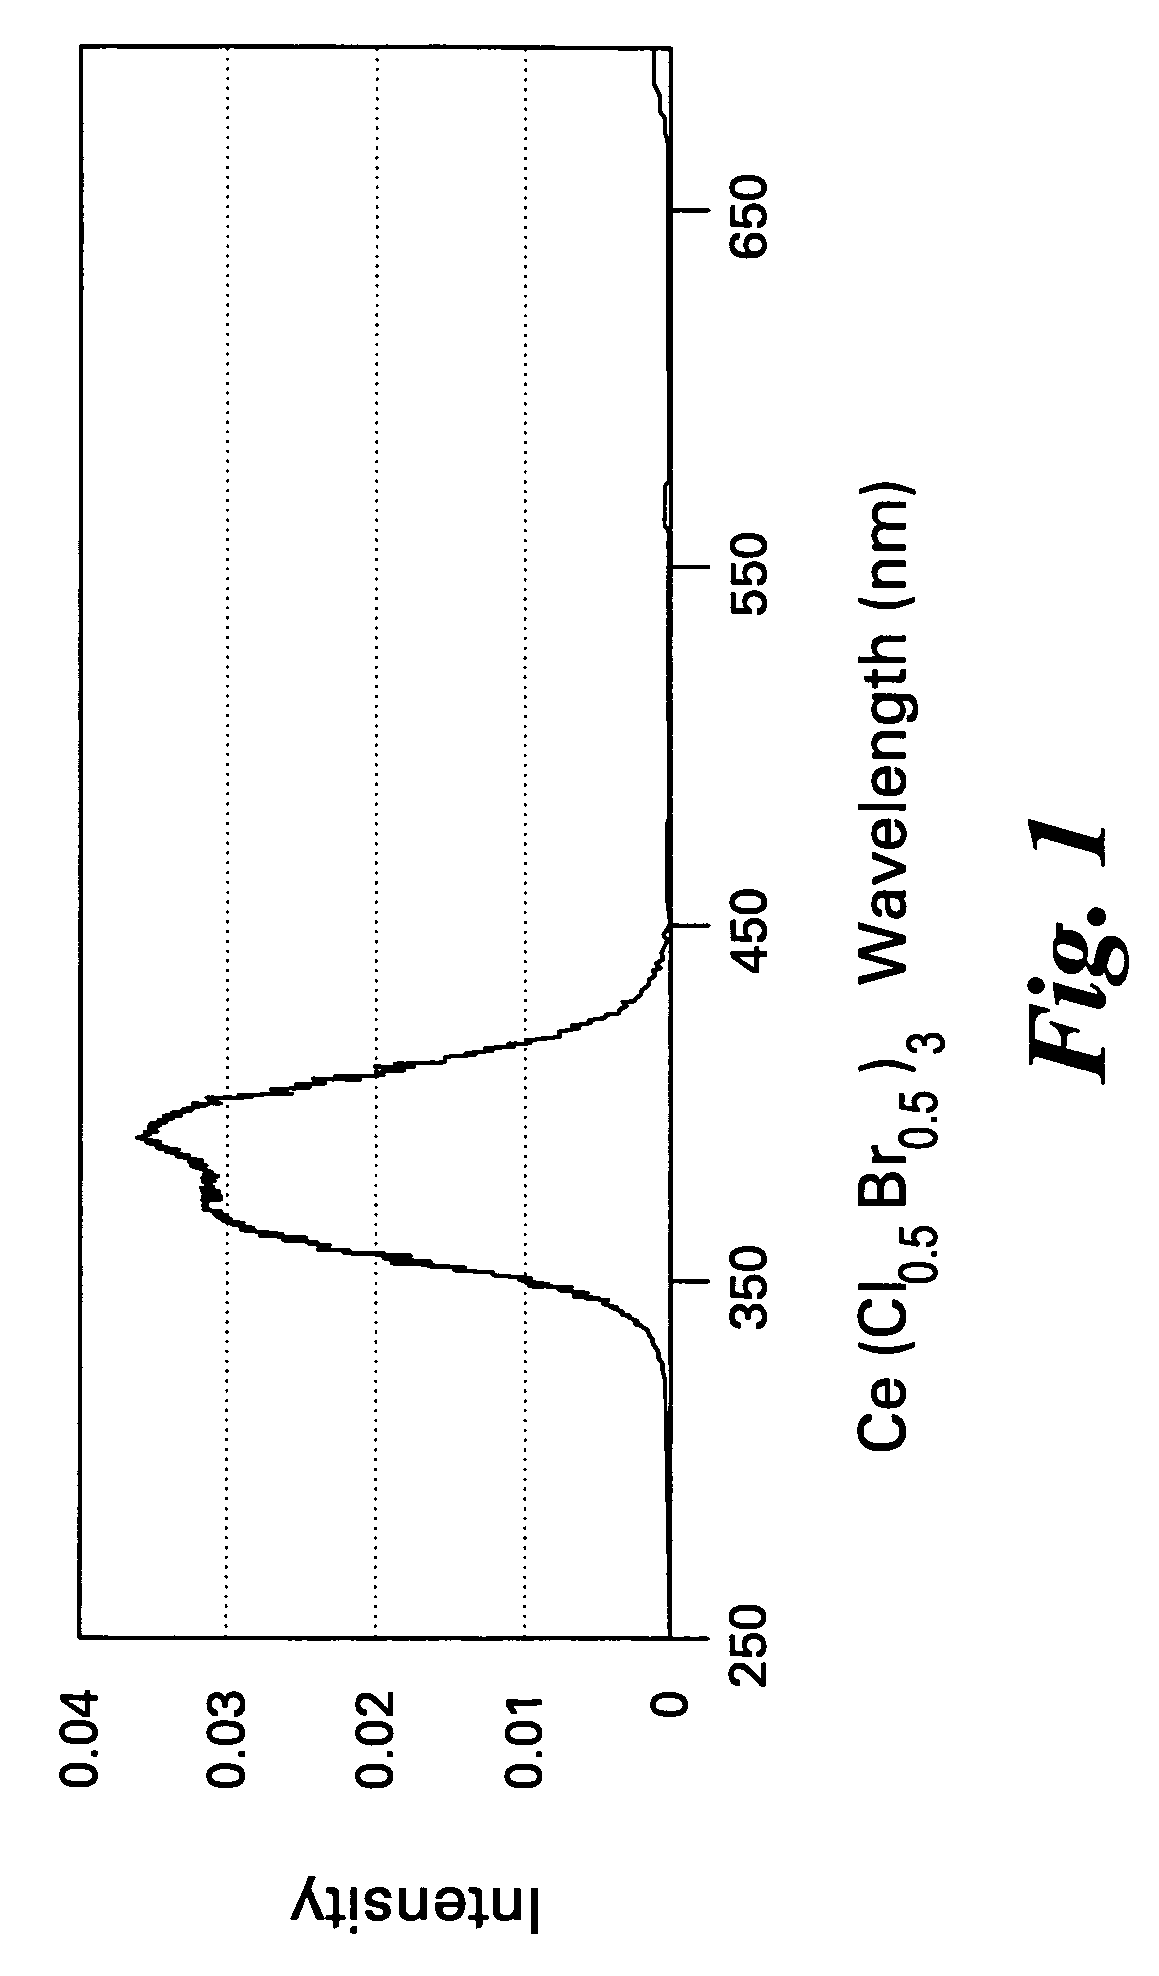 Scintillator compositions of cerium halides, and related articles and processes